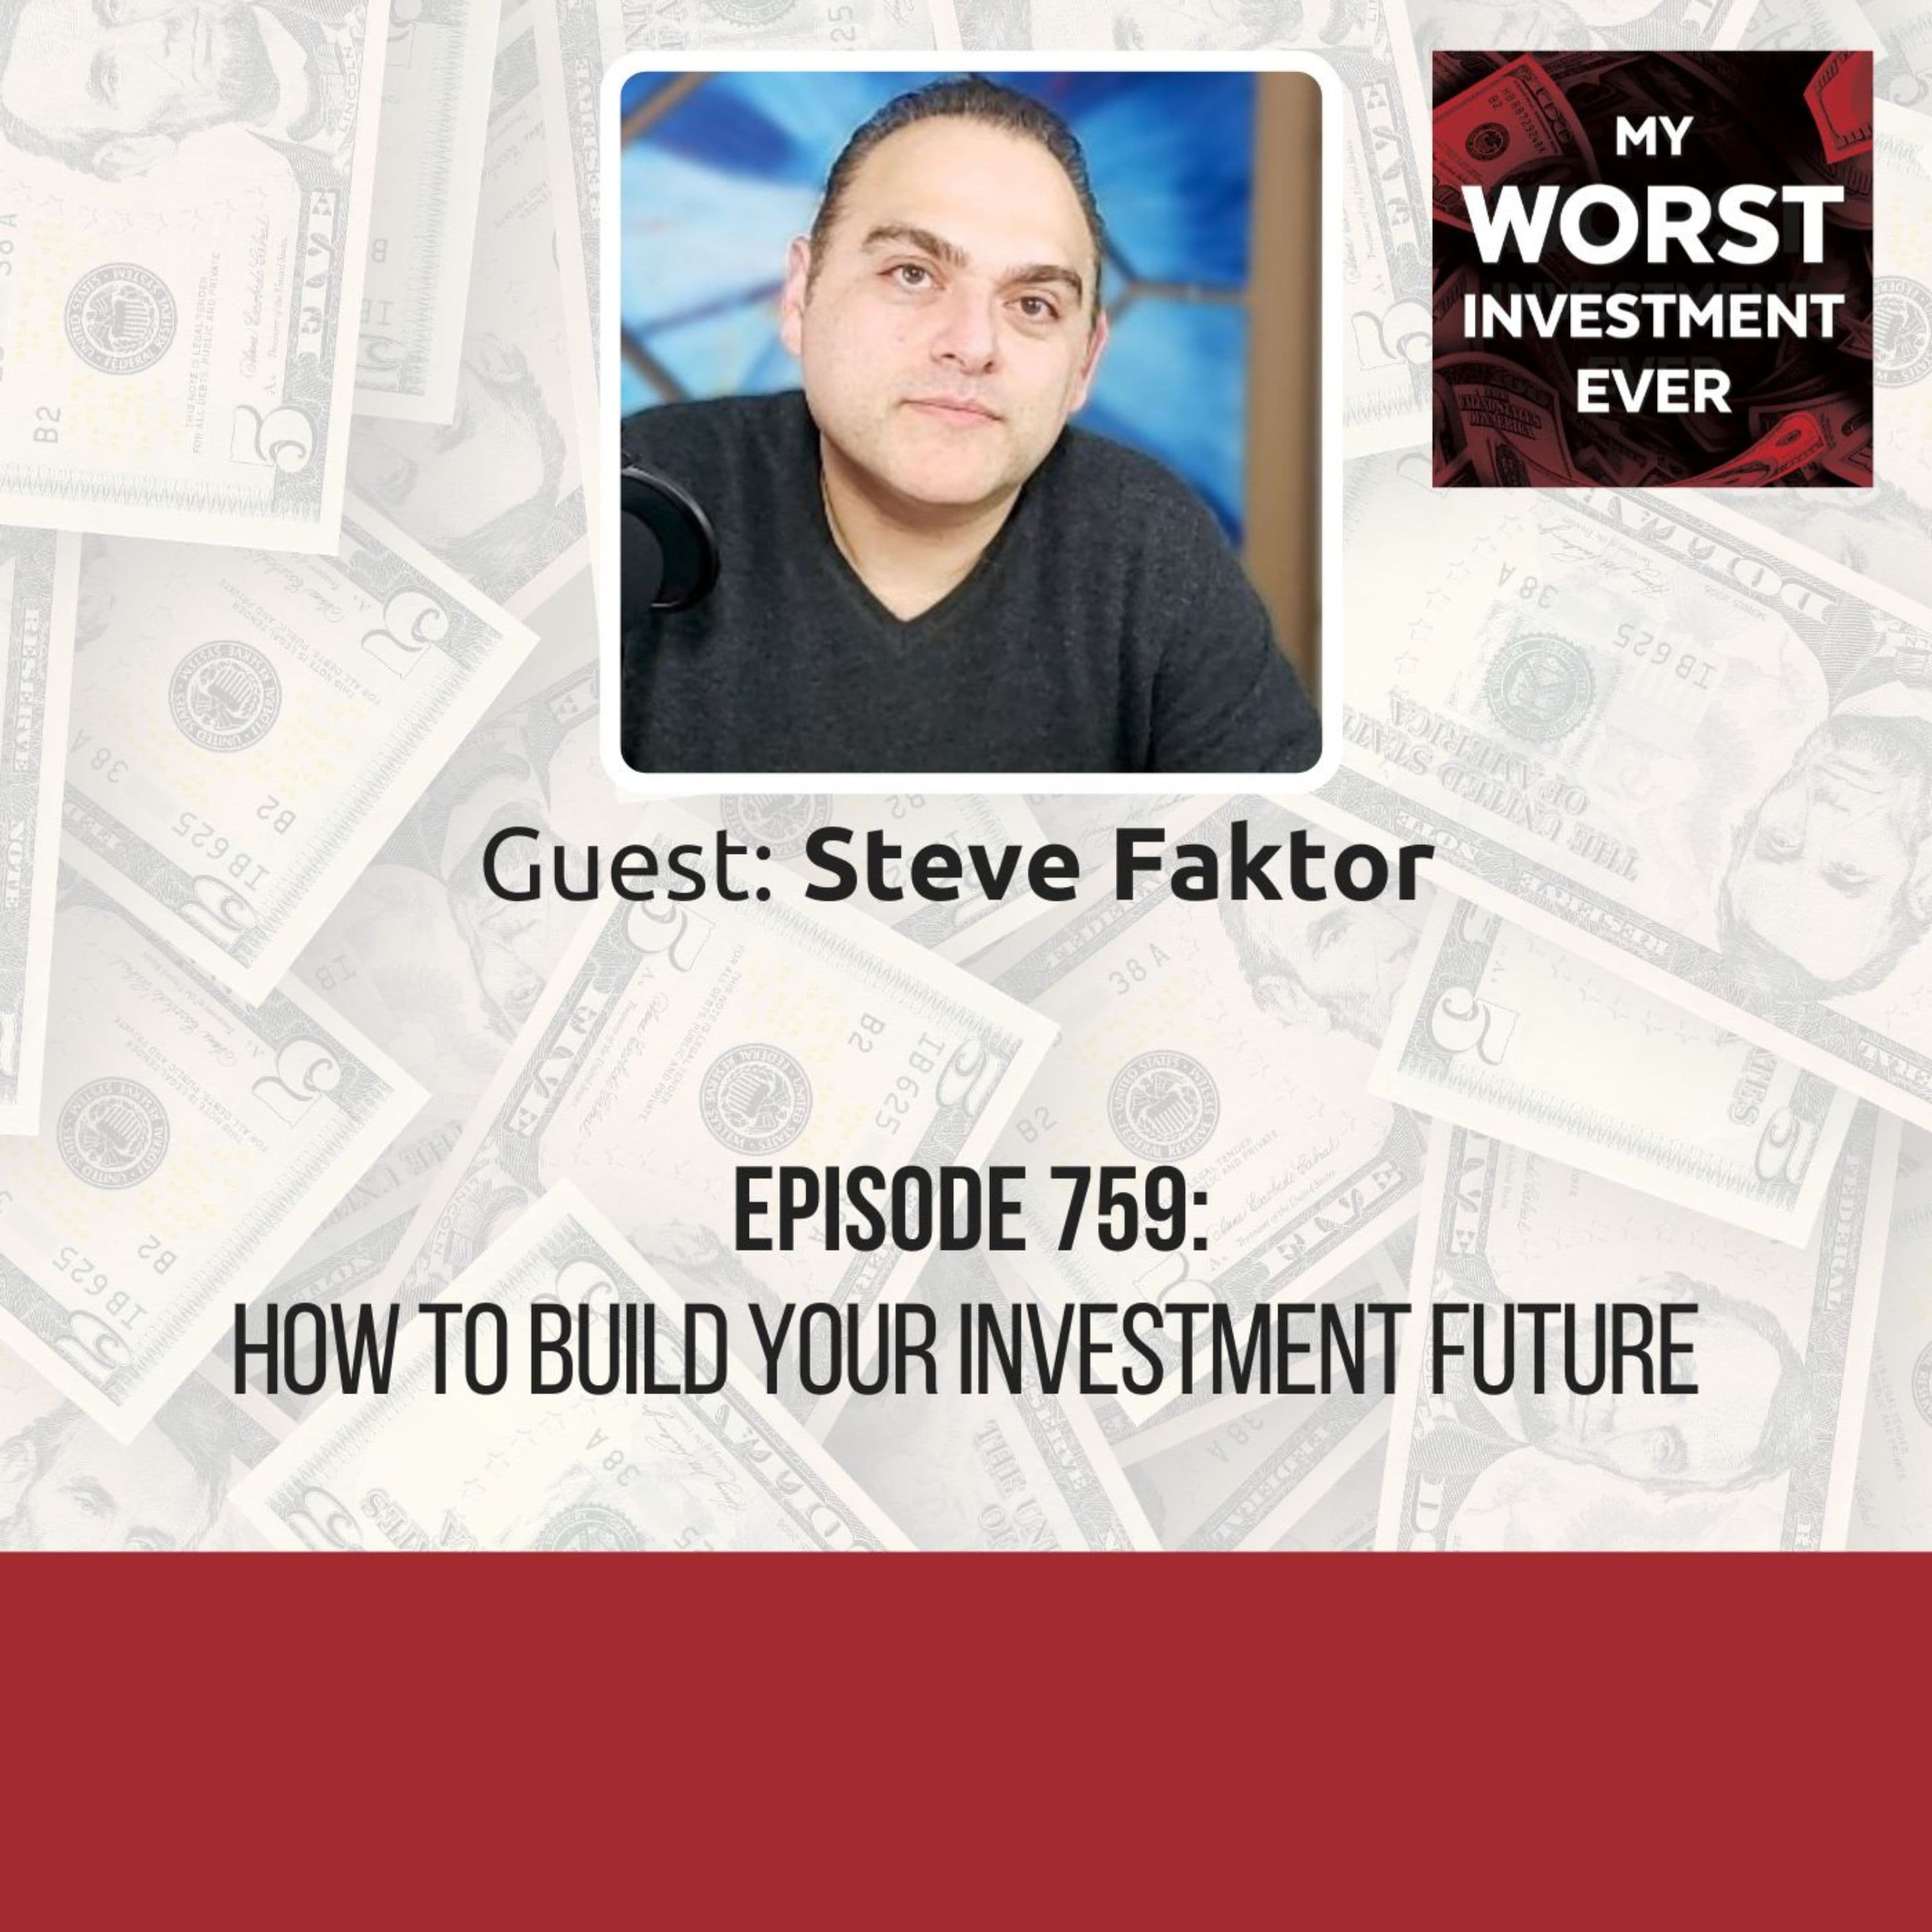 Steve Faktor – How to Build Your Investment Future